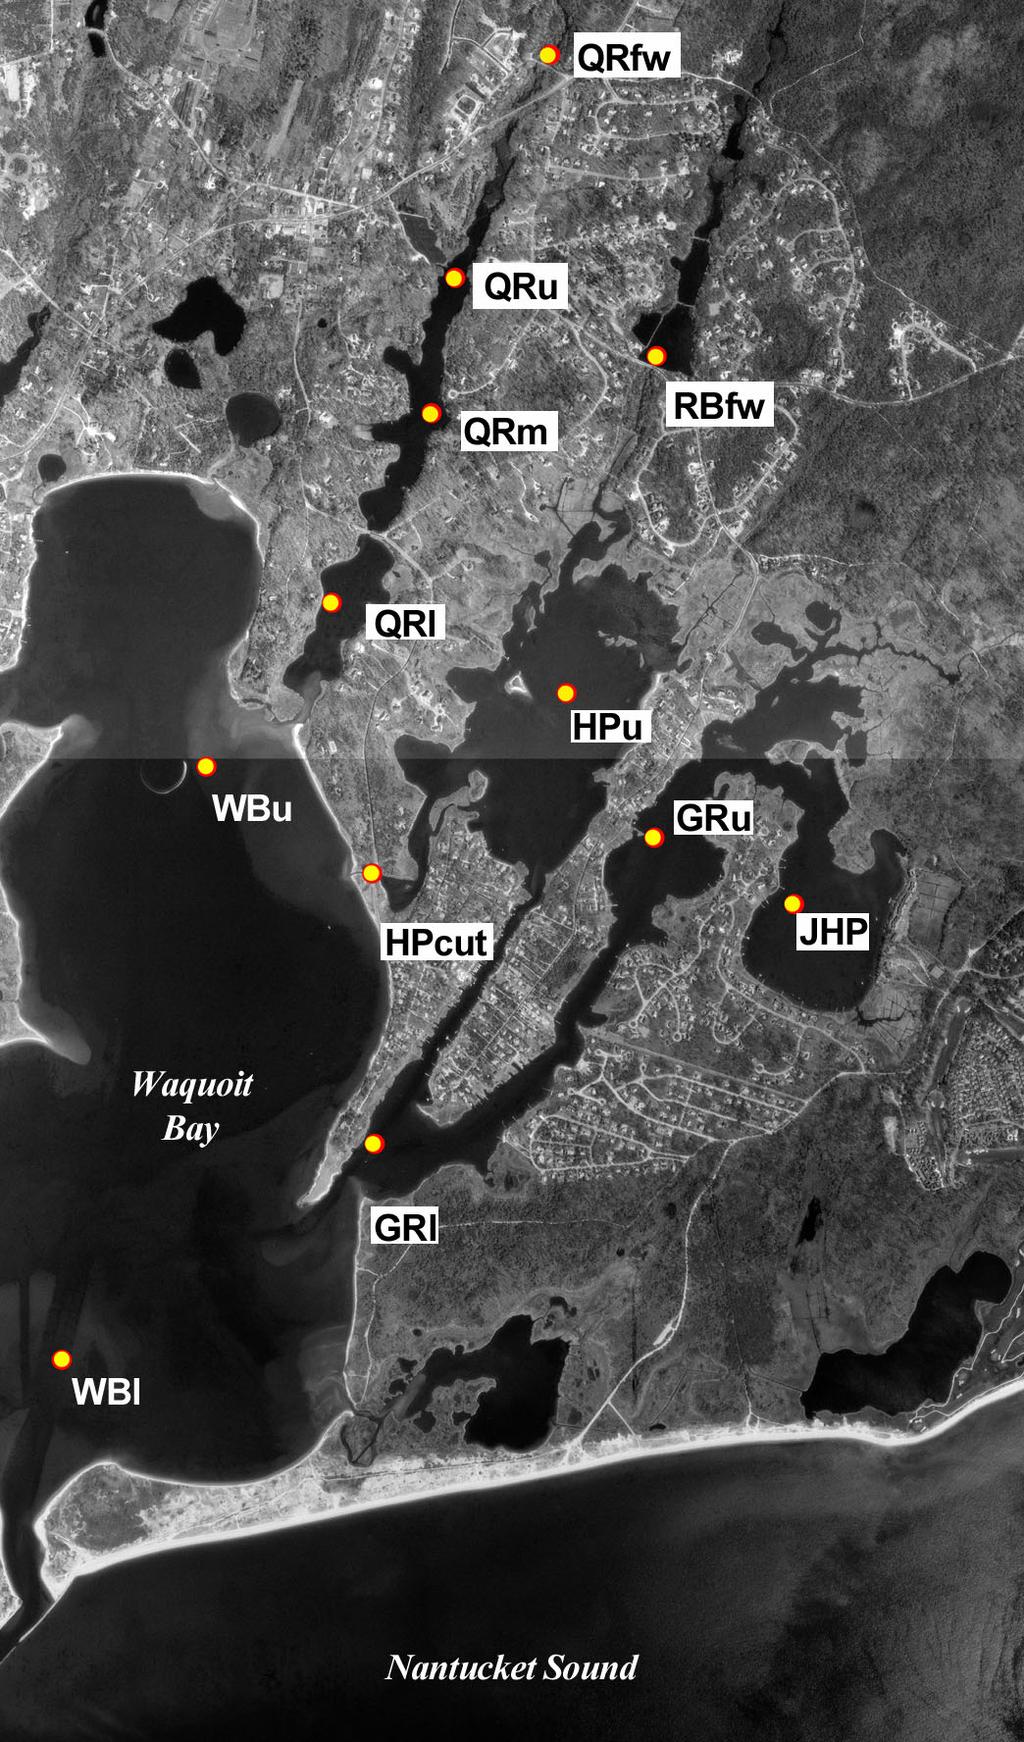 Figure VI-1. Estuarine water quality monitoring station locations in Waquoit Bay. Station labels correspond to those provided in Table VI-1.